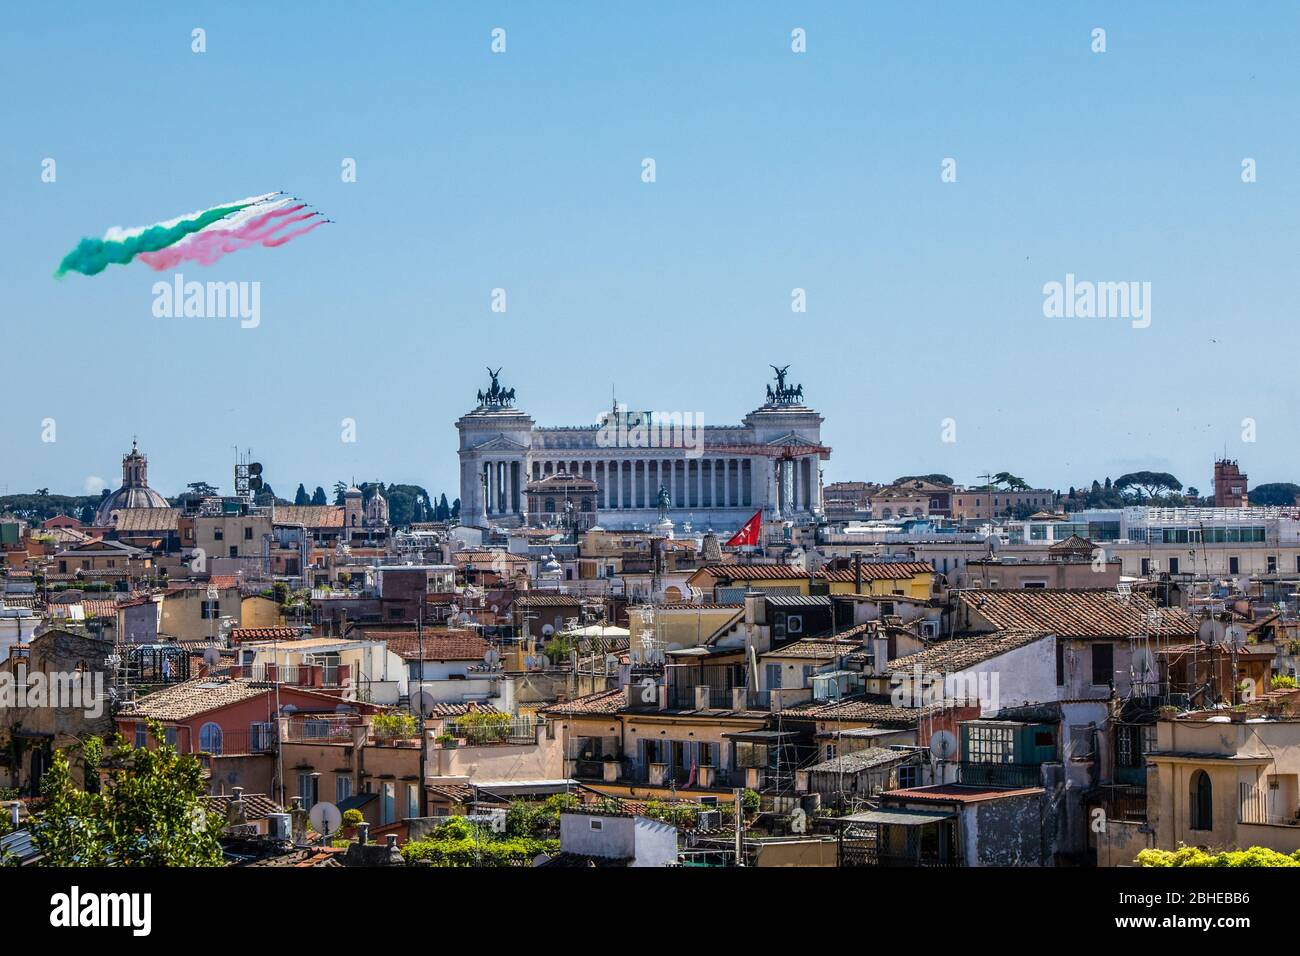 The Frecce Tricolori (tricolor arrows) fly over Rome during the feast of April 25, the anniversary of the liberation of Italy (Liberation Day) to commemorate the end of the Nazi occupation during the Second World War and the victory of the Resistance in Italy. This is distinct from the Republic Day, which takes place on June 2nd. Stock Photo